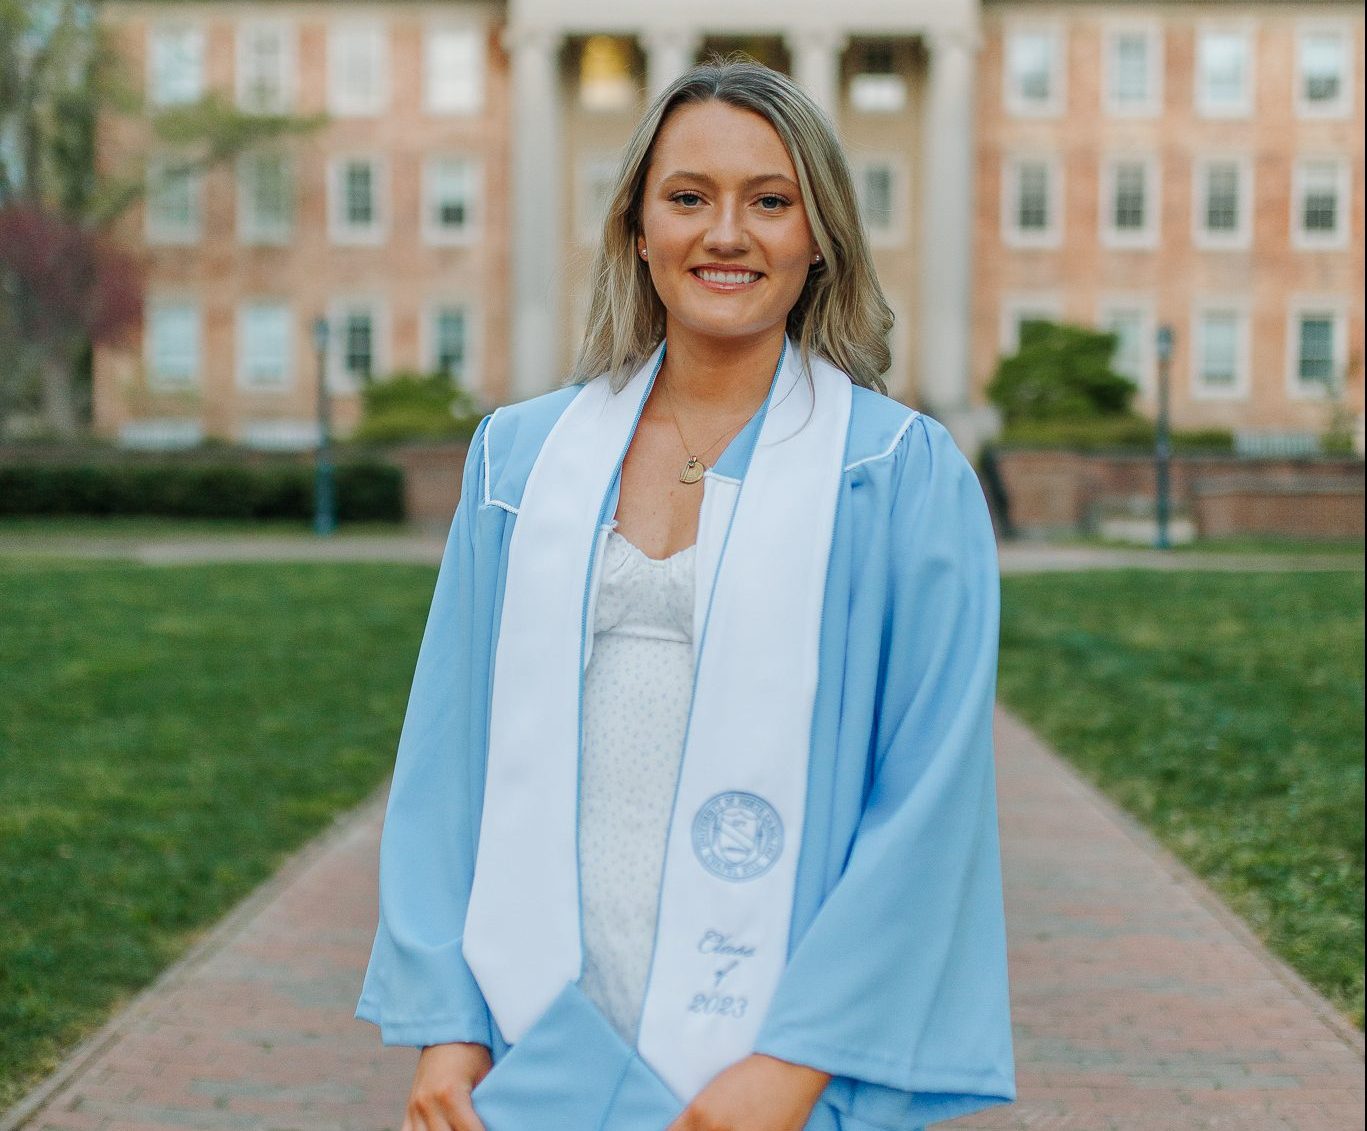 Erin Storch stands in front of South Building on UNC's campus.